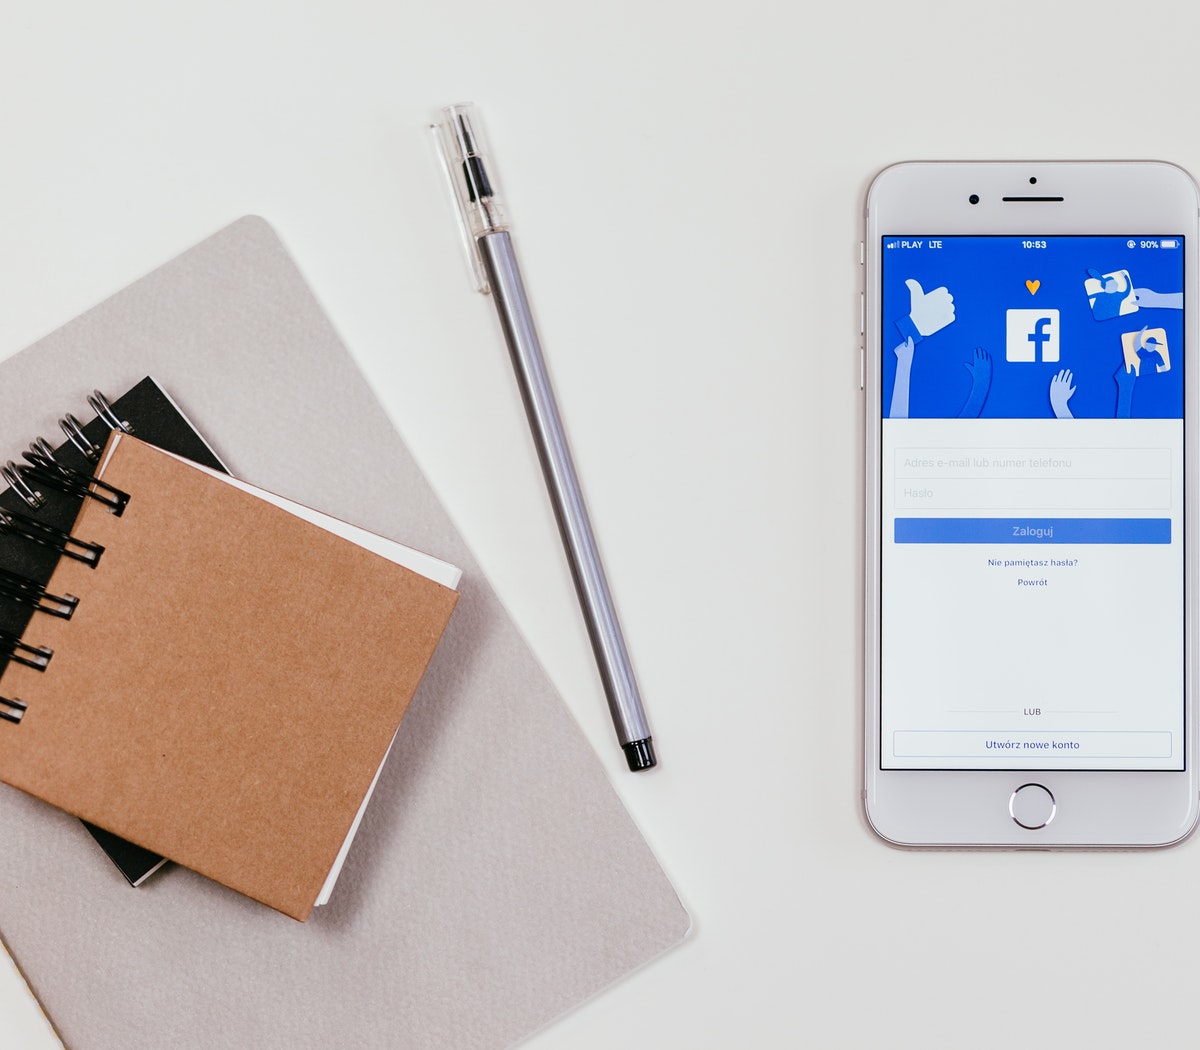 93 Facebook statistics to help businesses in 2022. 